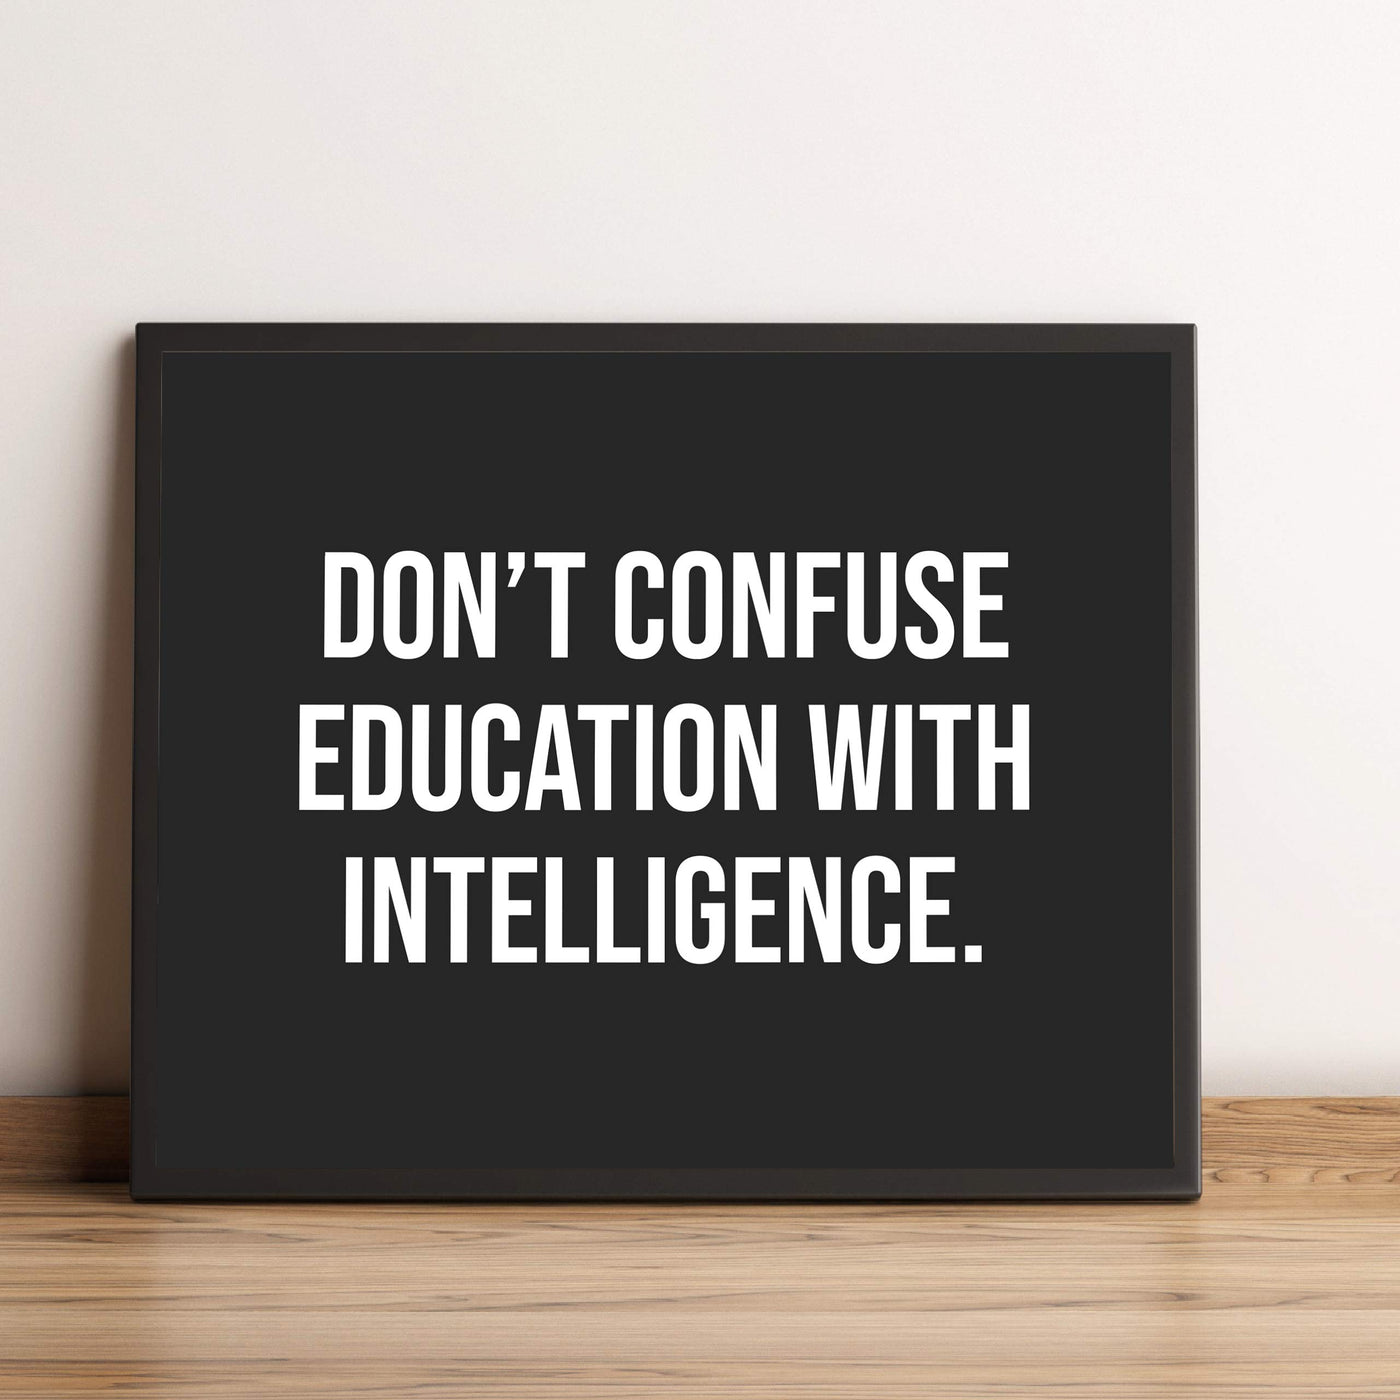 Don't Confuse Education With Intelligence Funny Typographic Wall Art Sign -10 x 8" Sarcastic Poster Print-Ready to Frame. Humorous Decor for Home-Office-Shop-Bar-Cave. Perfect Desk Sign! Fun Gift!